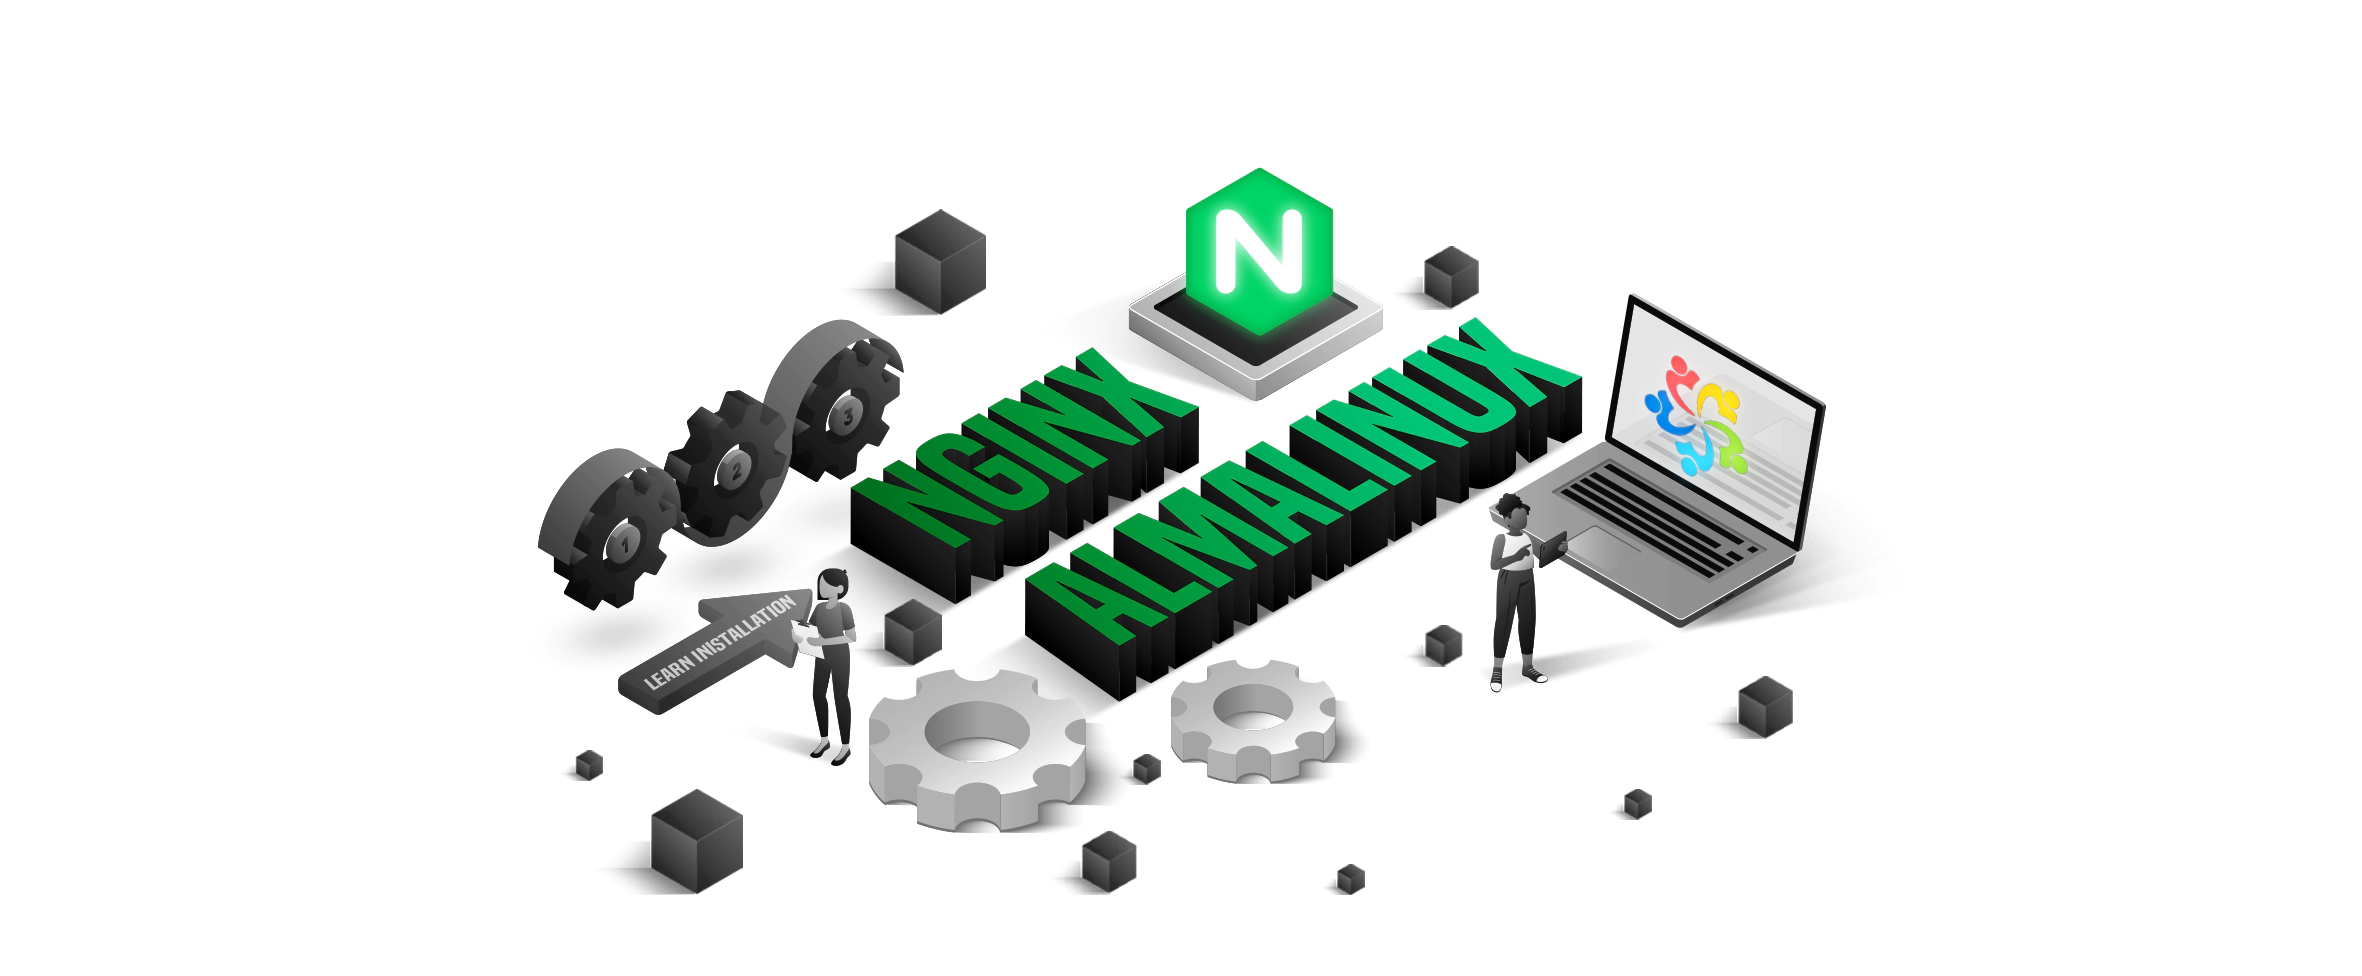 How to install Nginx in